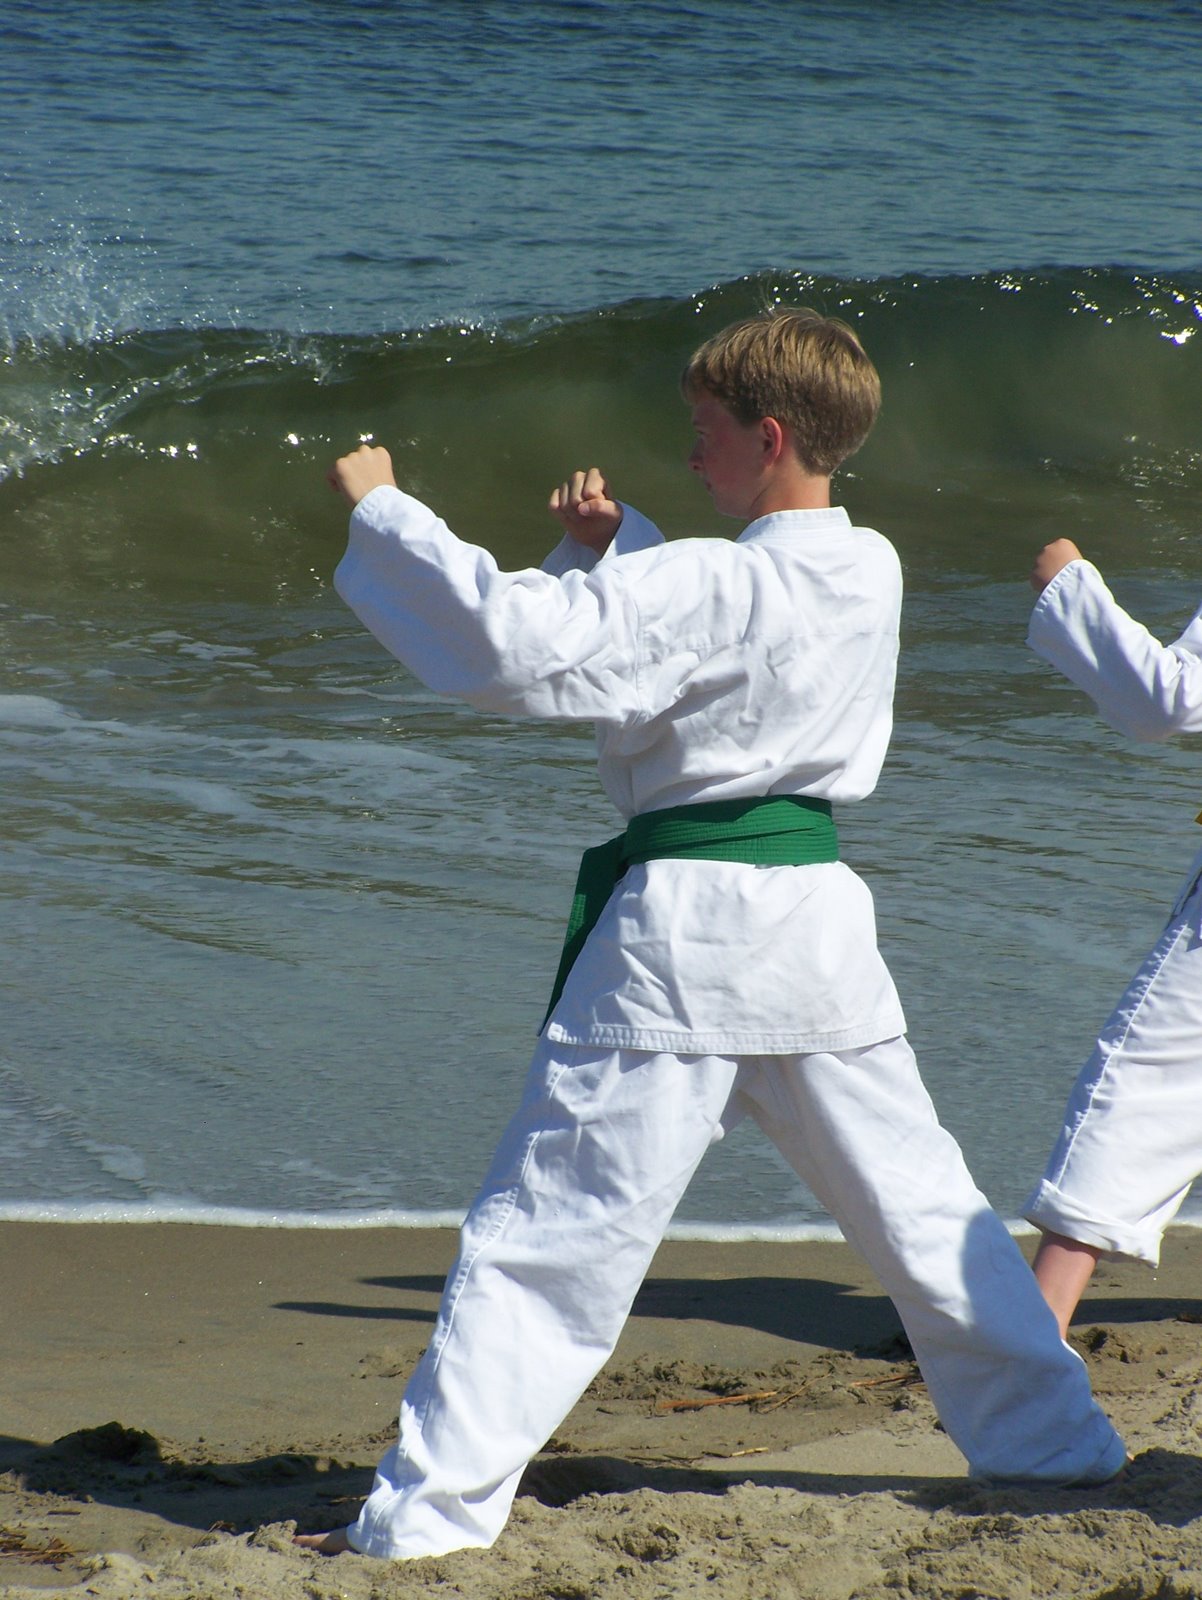 [Tae+Kwon+Do+Pictures+June+2008+026.jpg]